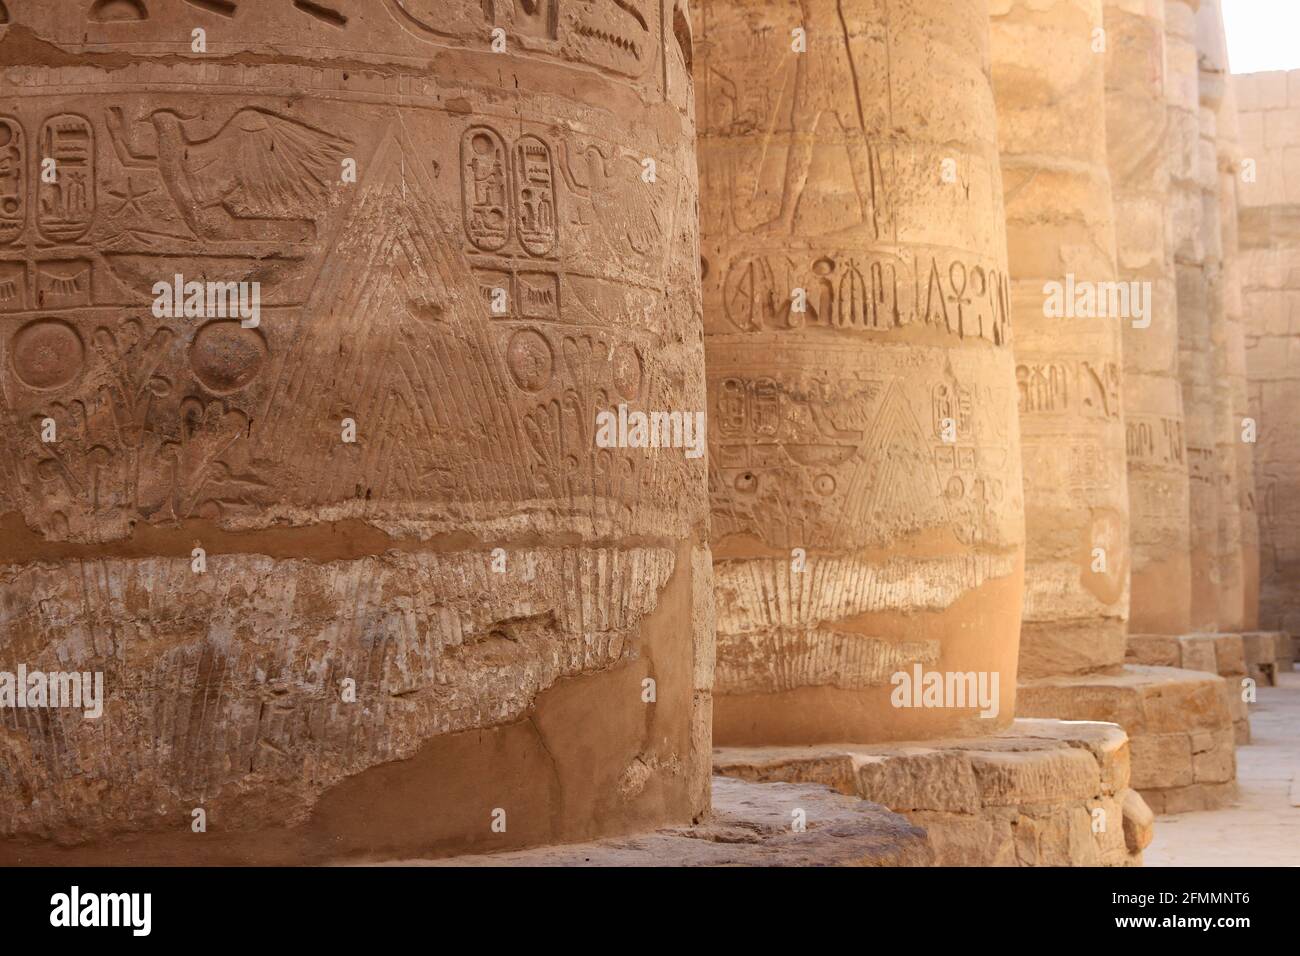 Row of columns with hieroglyphics at Temple of Karnak, Luxor, Egypt Stock Photo